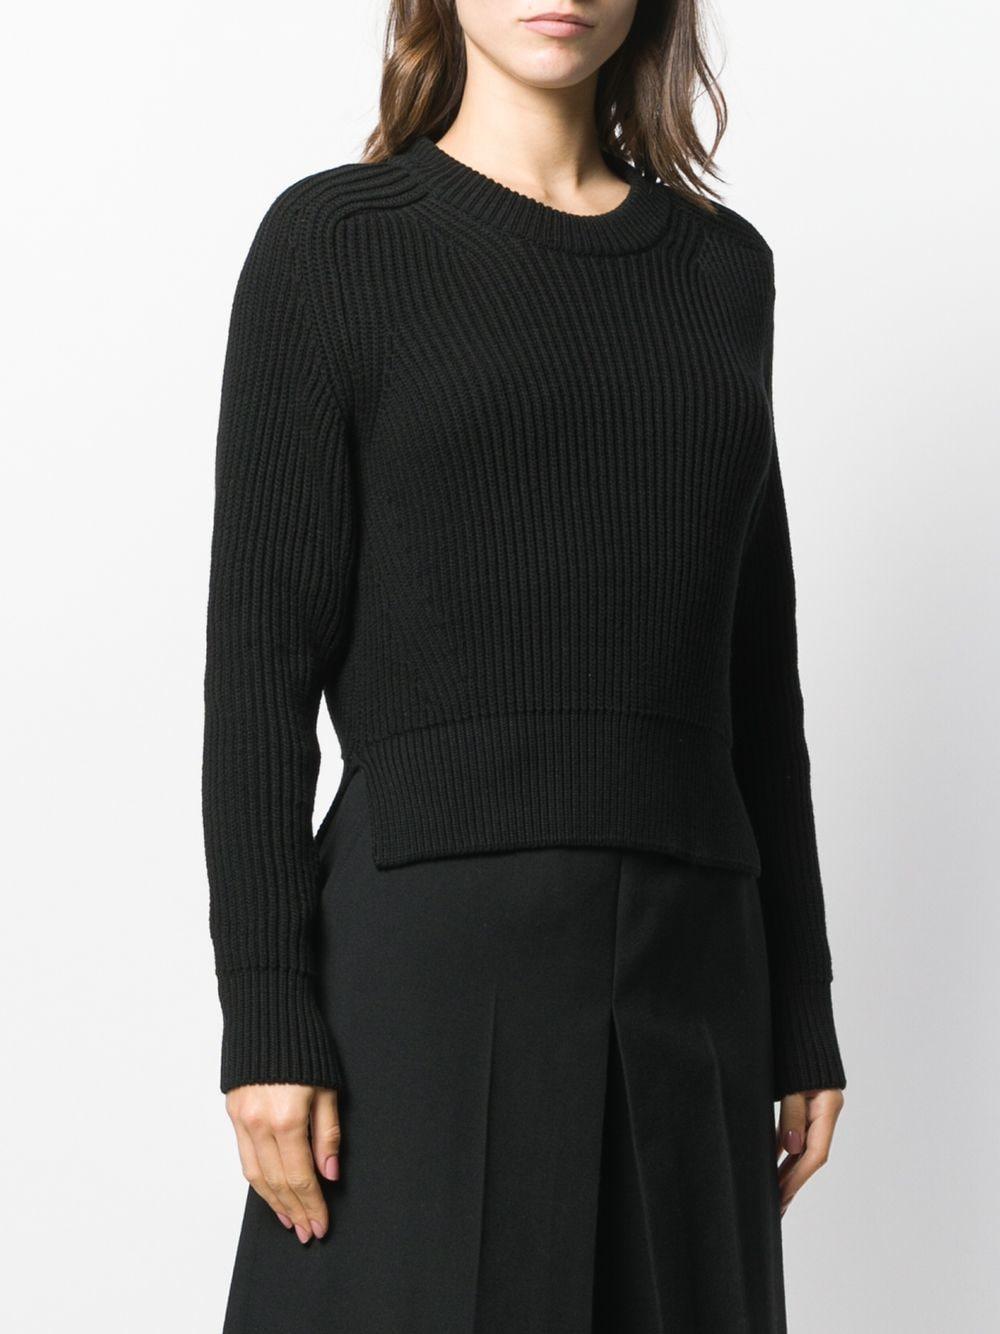 AMI Cotton Crew Neck Knitted Top in Black - Lyst